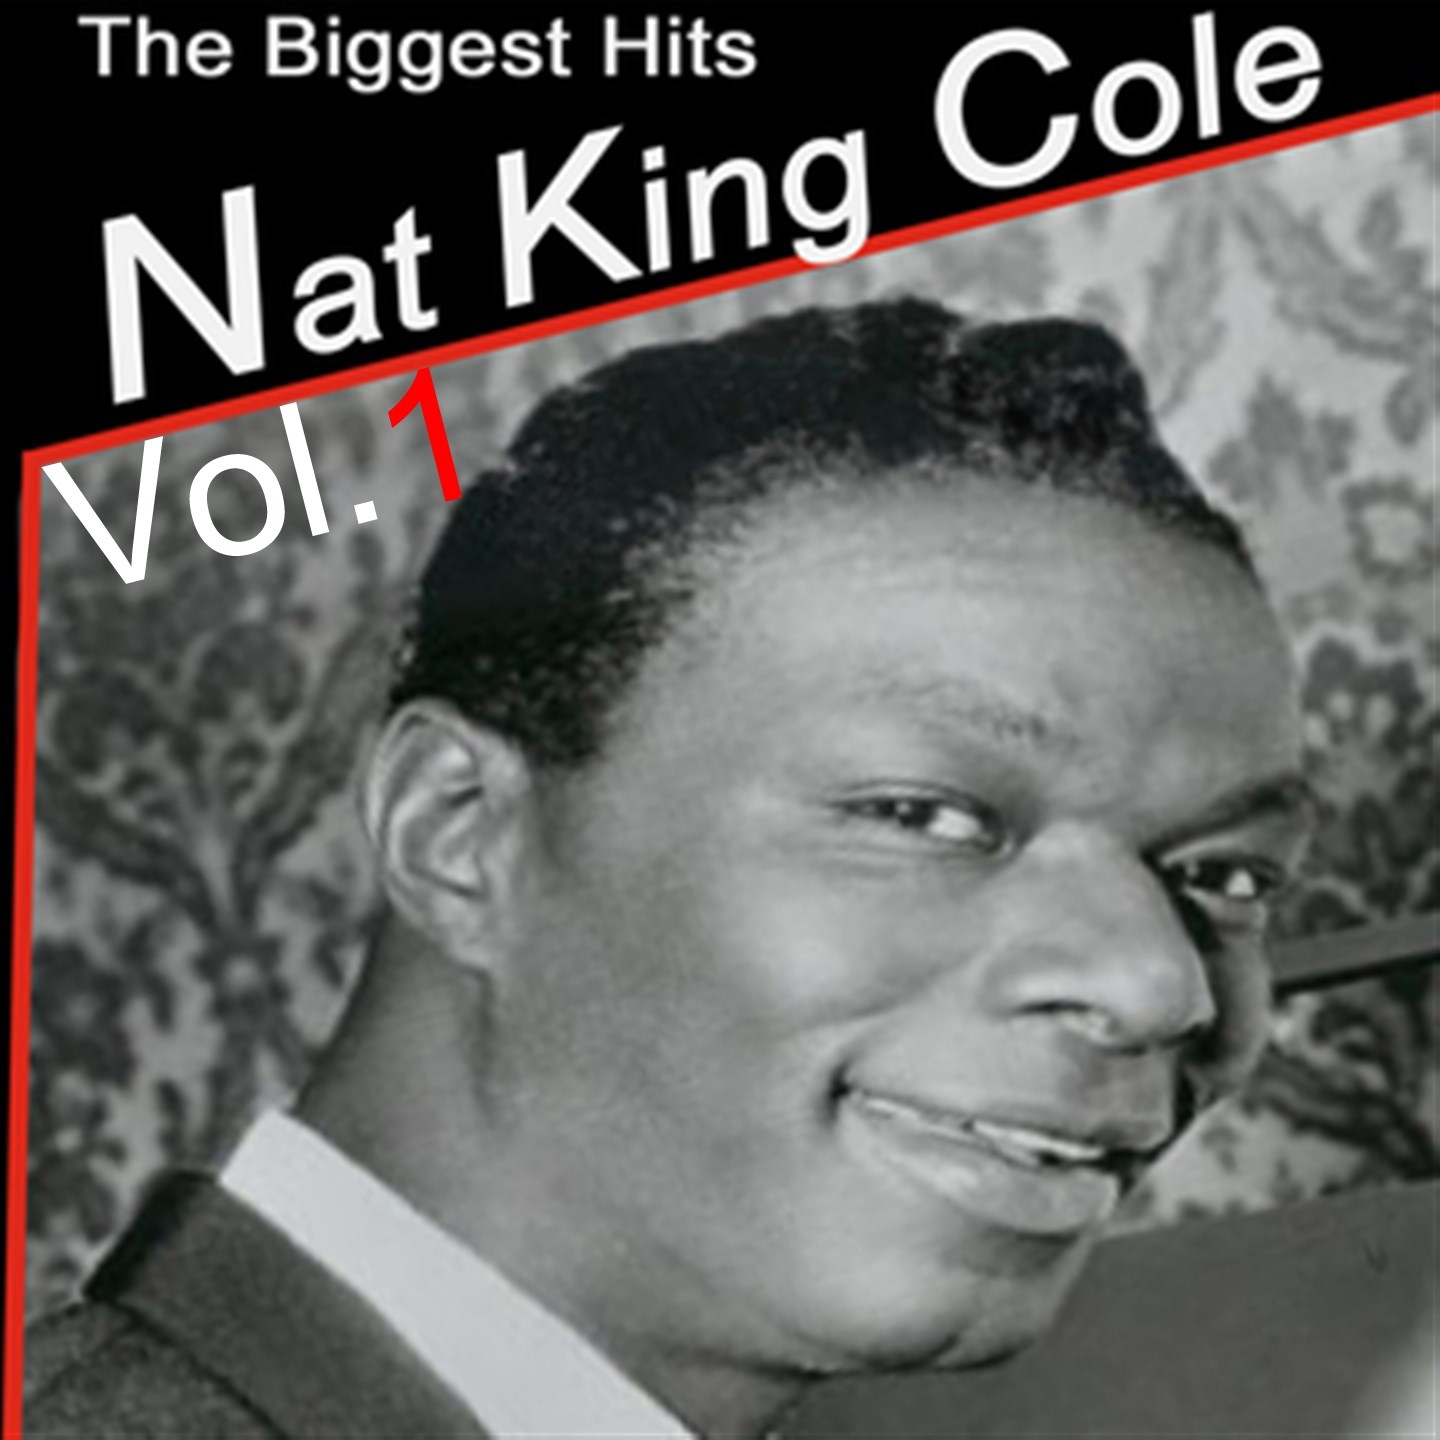 Nat King Cole Deluxe Edition, Vol. 1 (Remastered)